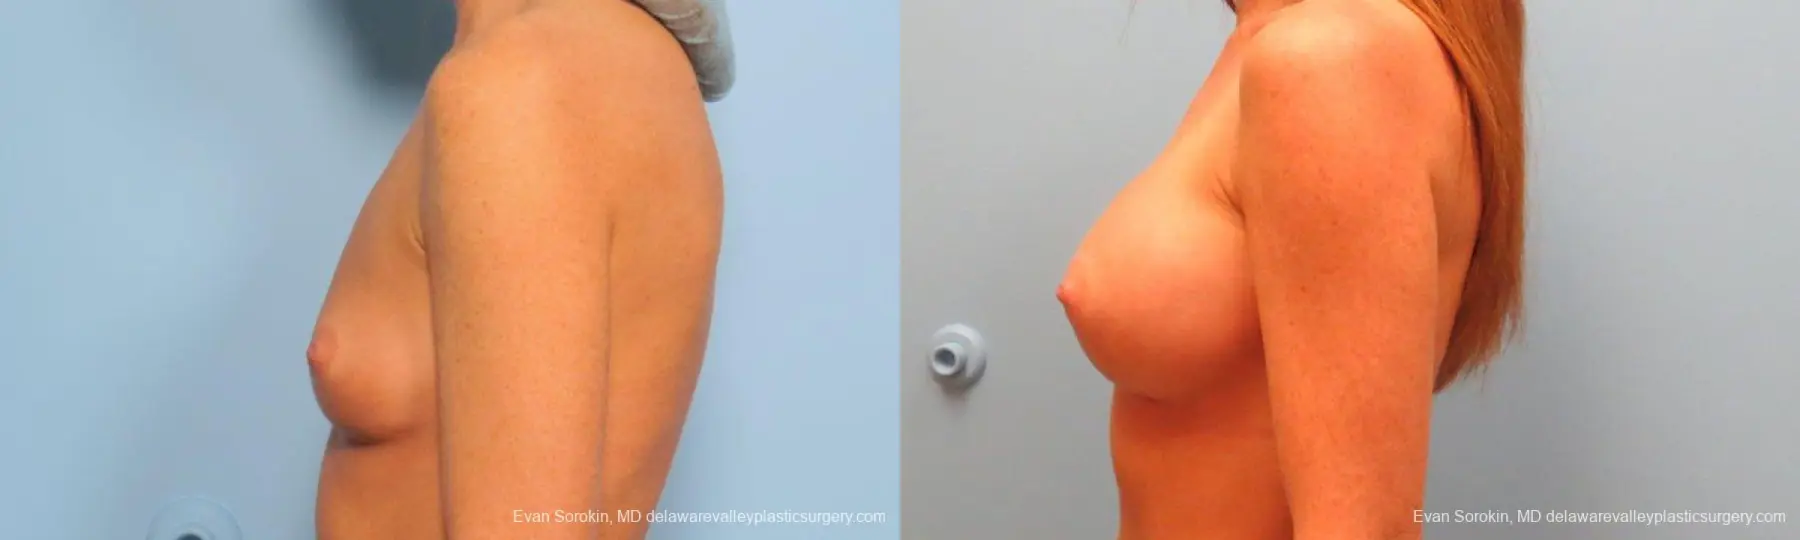 Philadelphia Breast Augmentation 9179 - Before and After 5